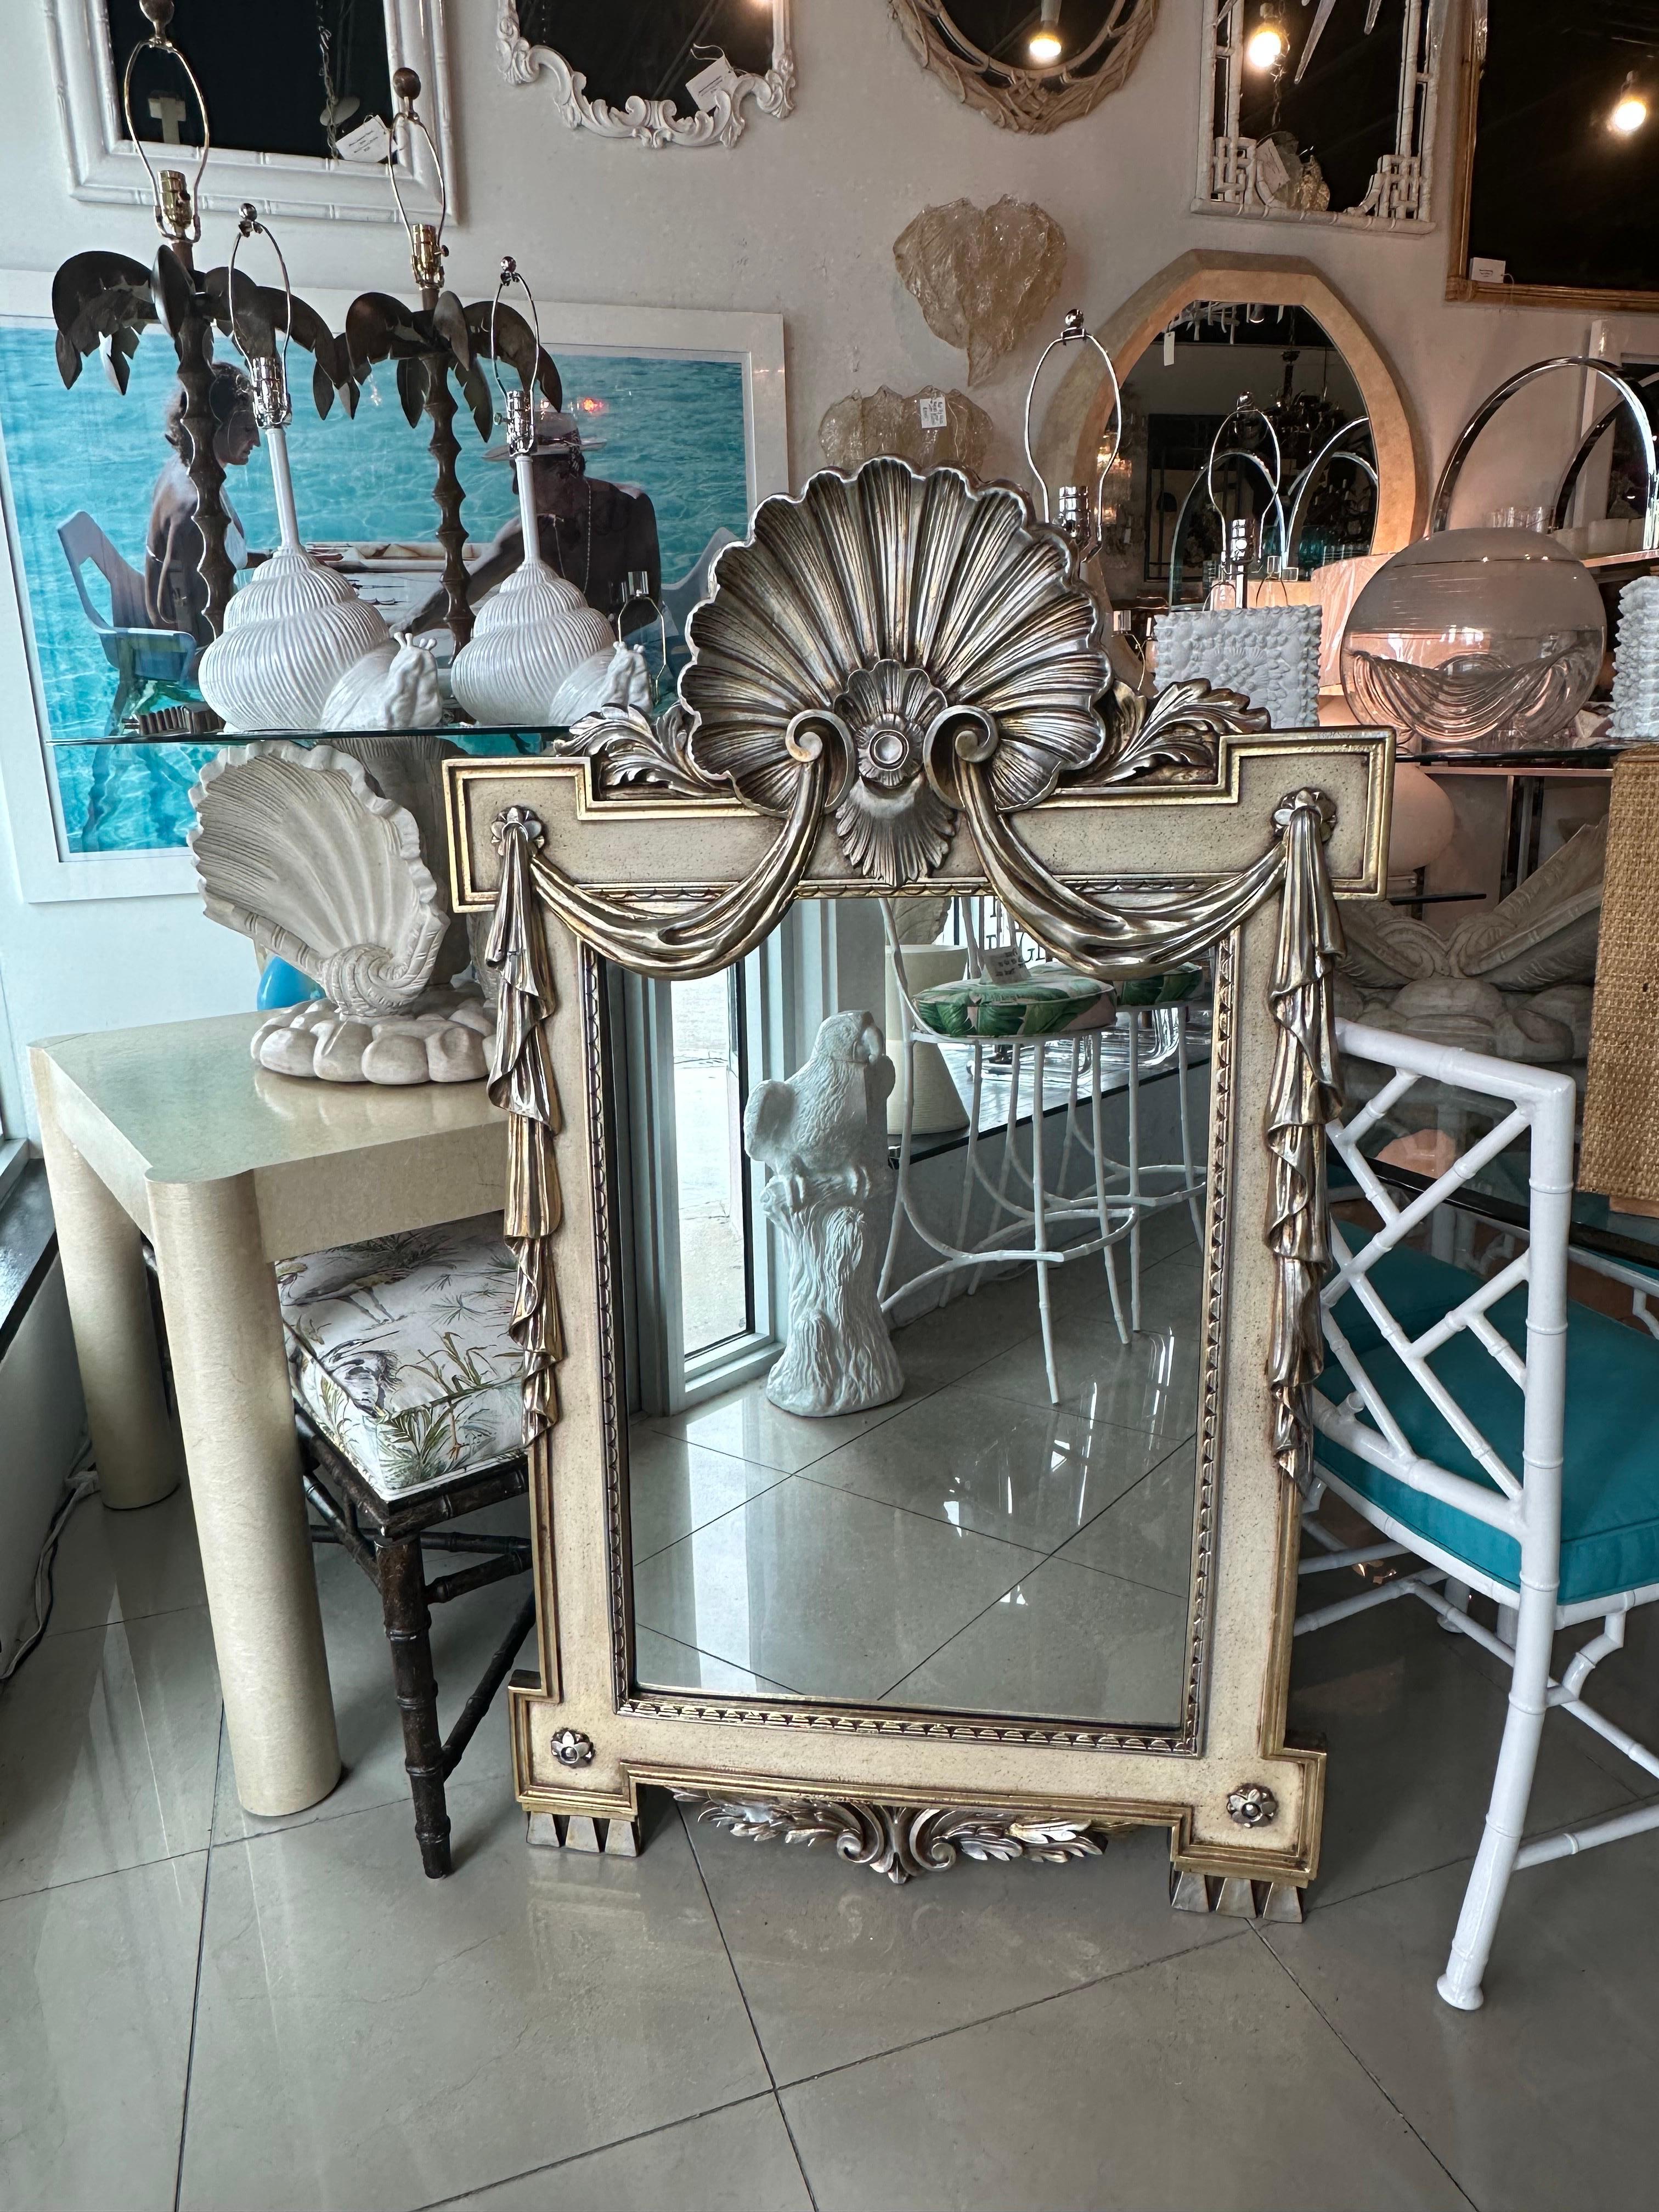 Vintage silver and gold draped shell wall mirror. Original silver & gold finish. Comes ready to hang. Dimensions: 55.5 H x 33.25 W x 2.5 D.